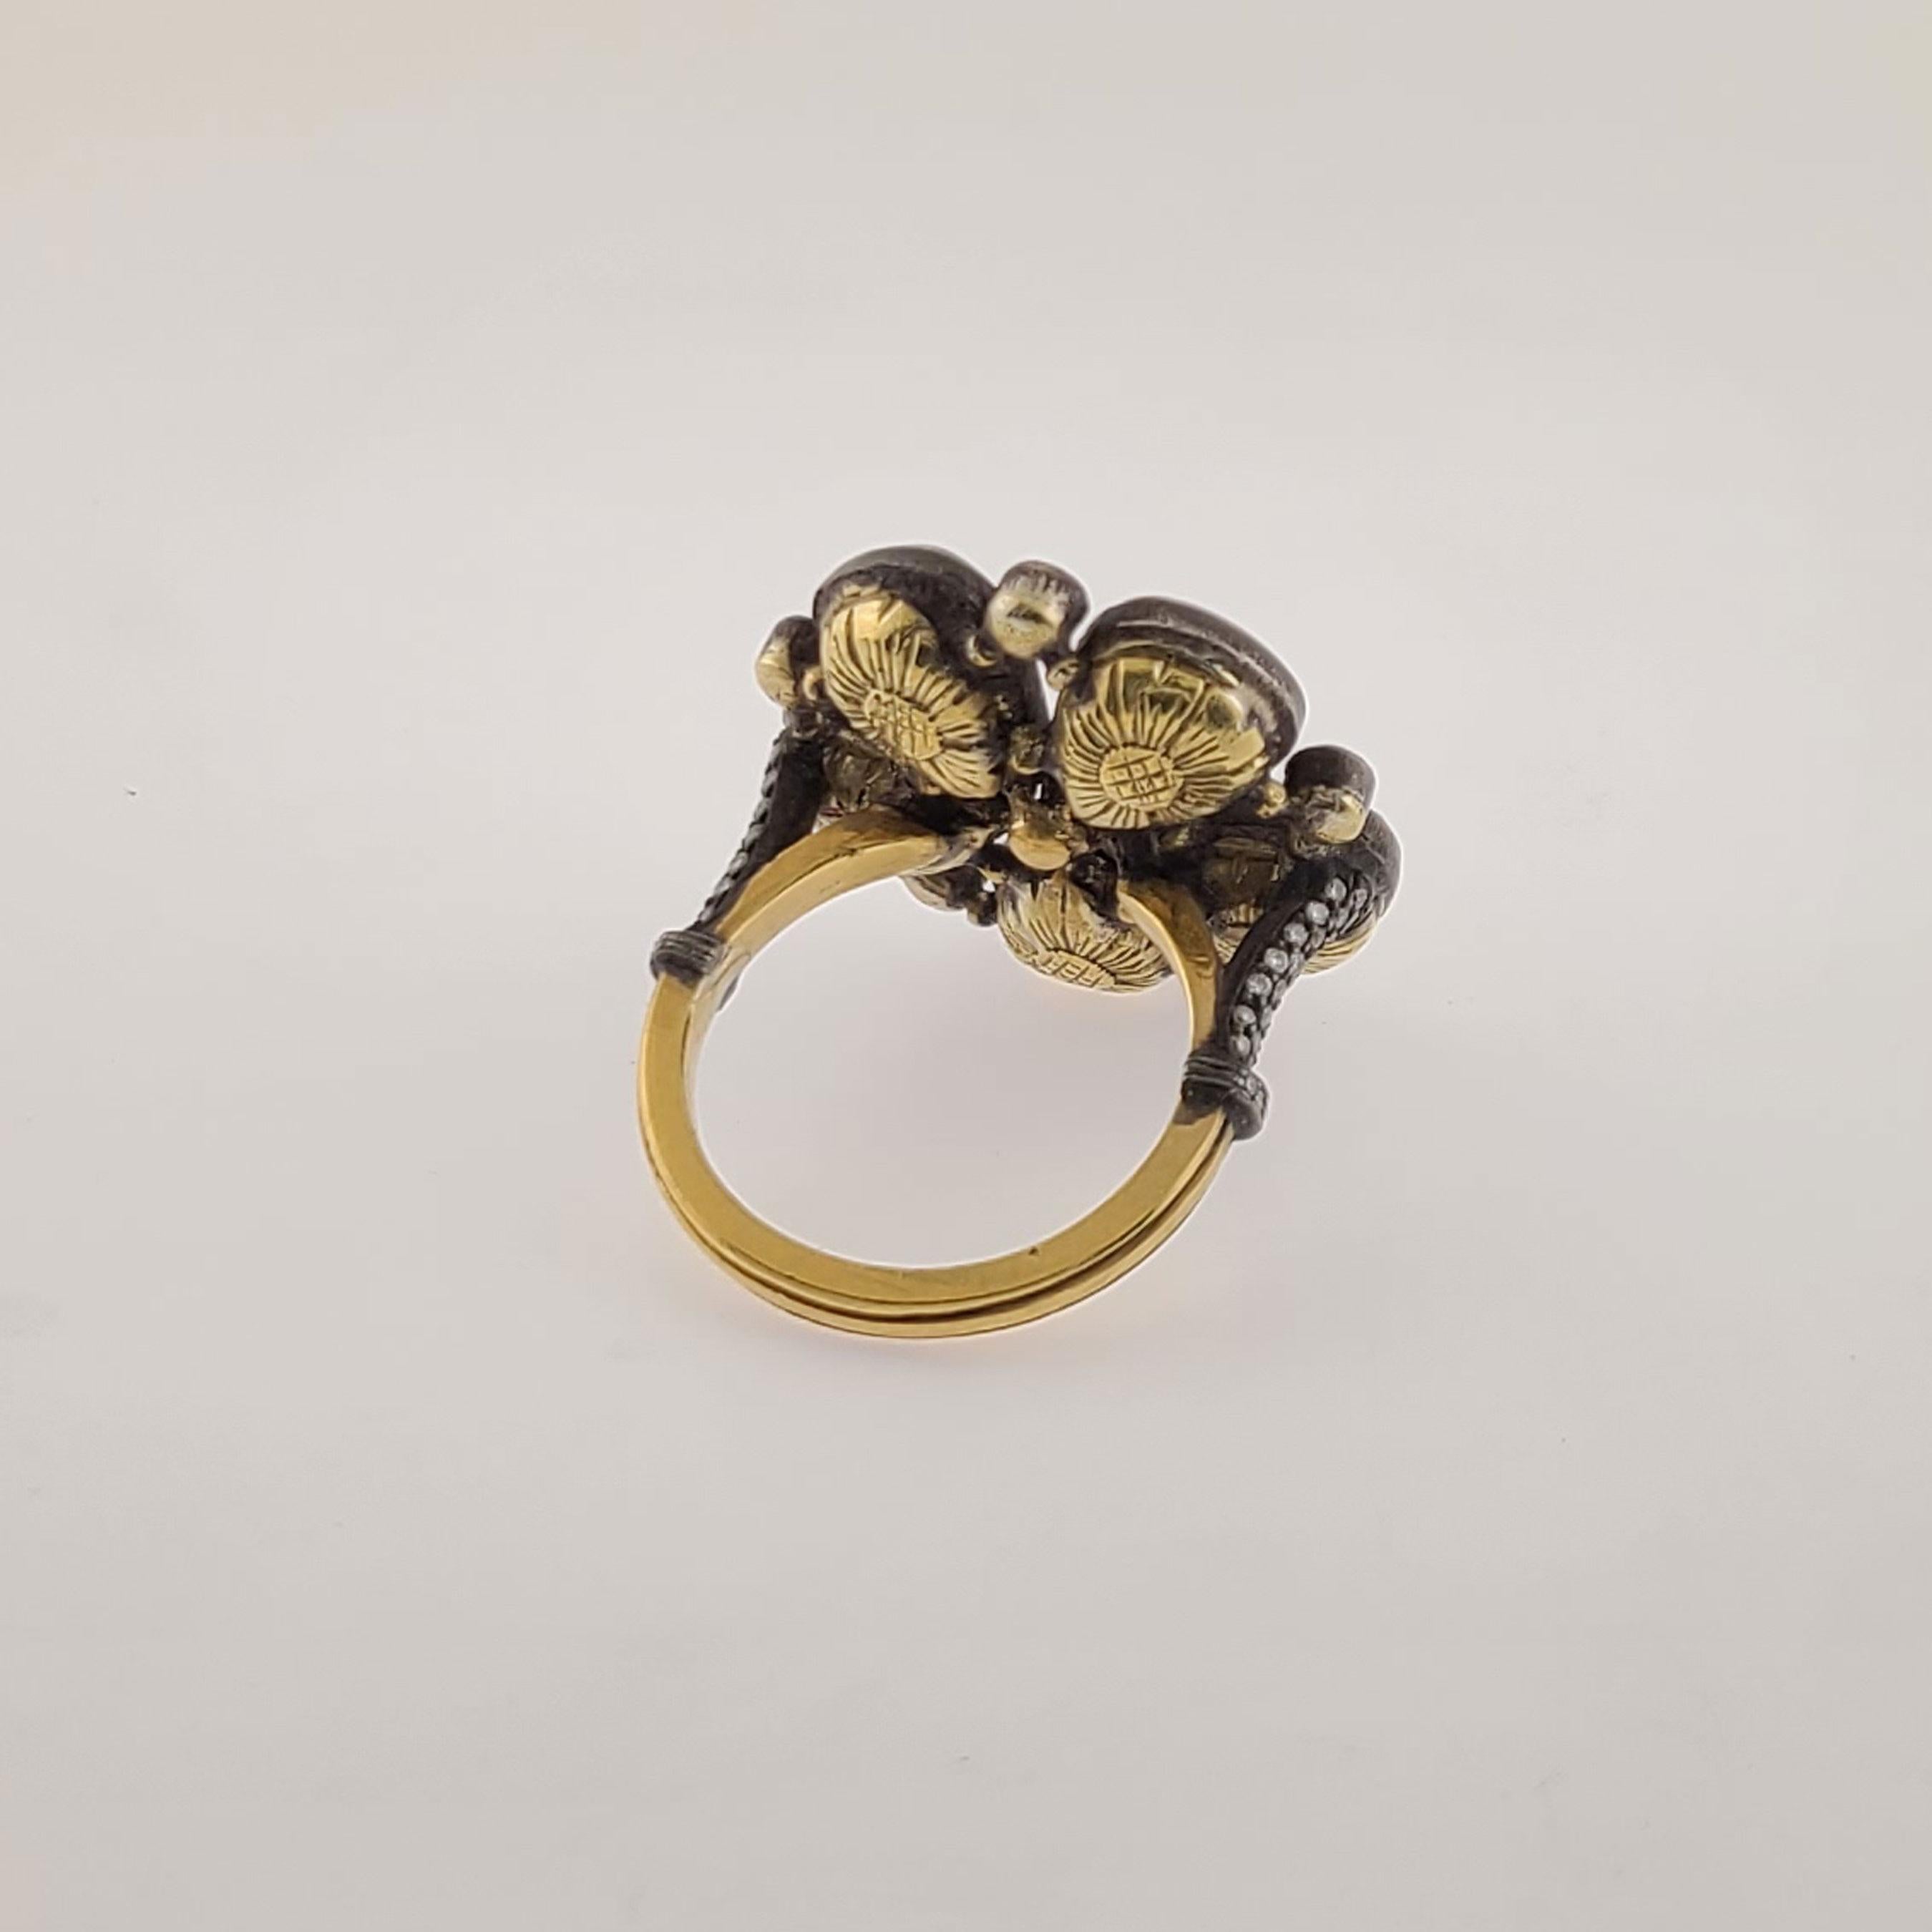 This one of a kind 18K lucky flower Gold Ring has 5 leaves of 5.11cts Pear-shape rose-cut Diamonds and those 5 leaves are bridged to each other with 5 round brilliant Diamonds. The middle of the flower has another small round brilliant Diamonds to